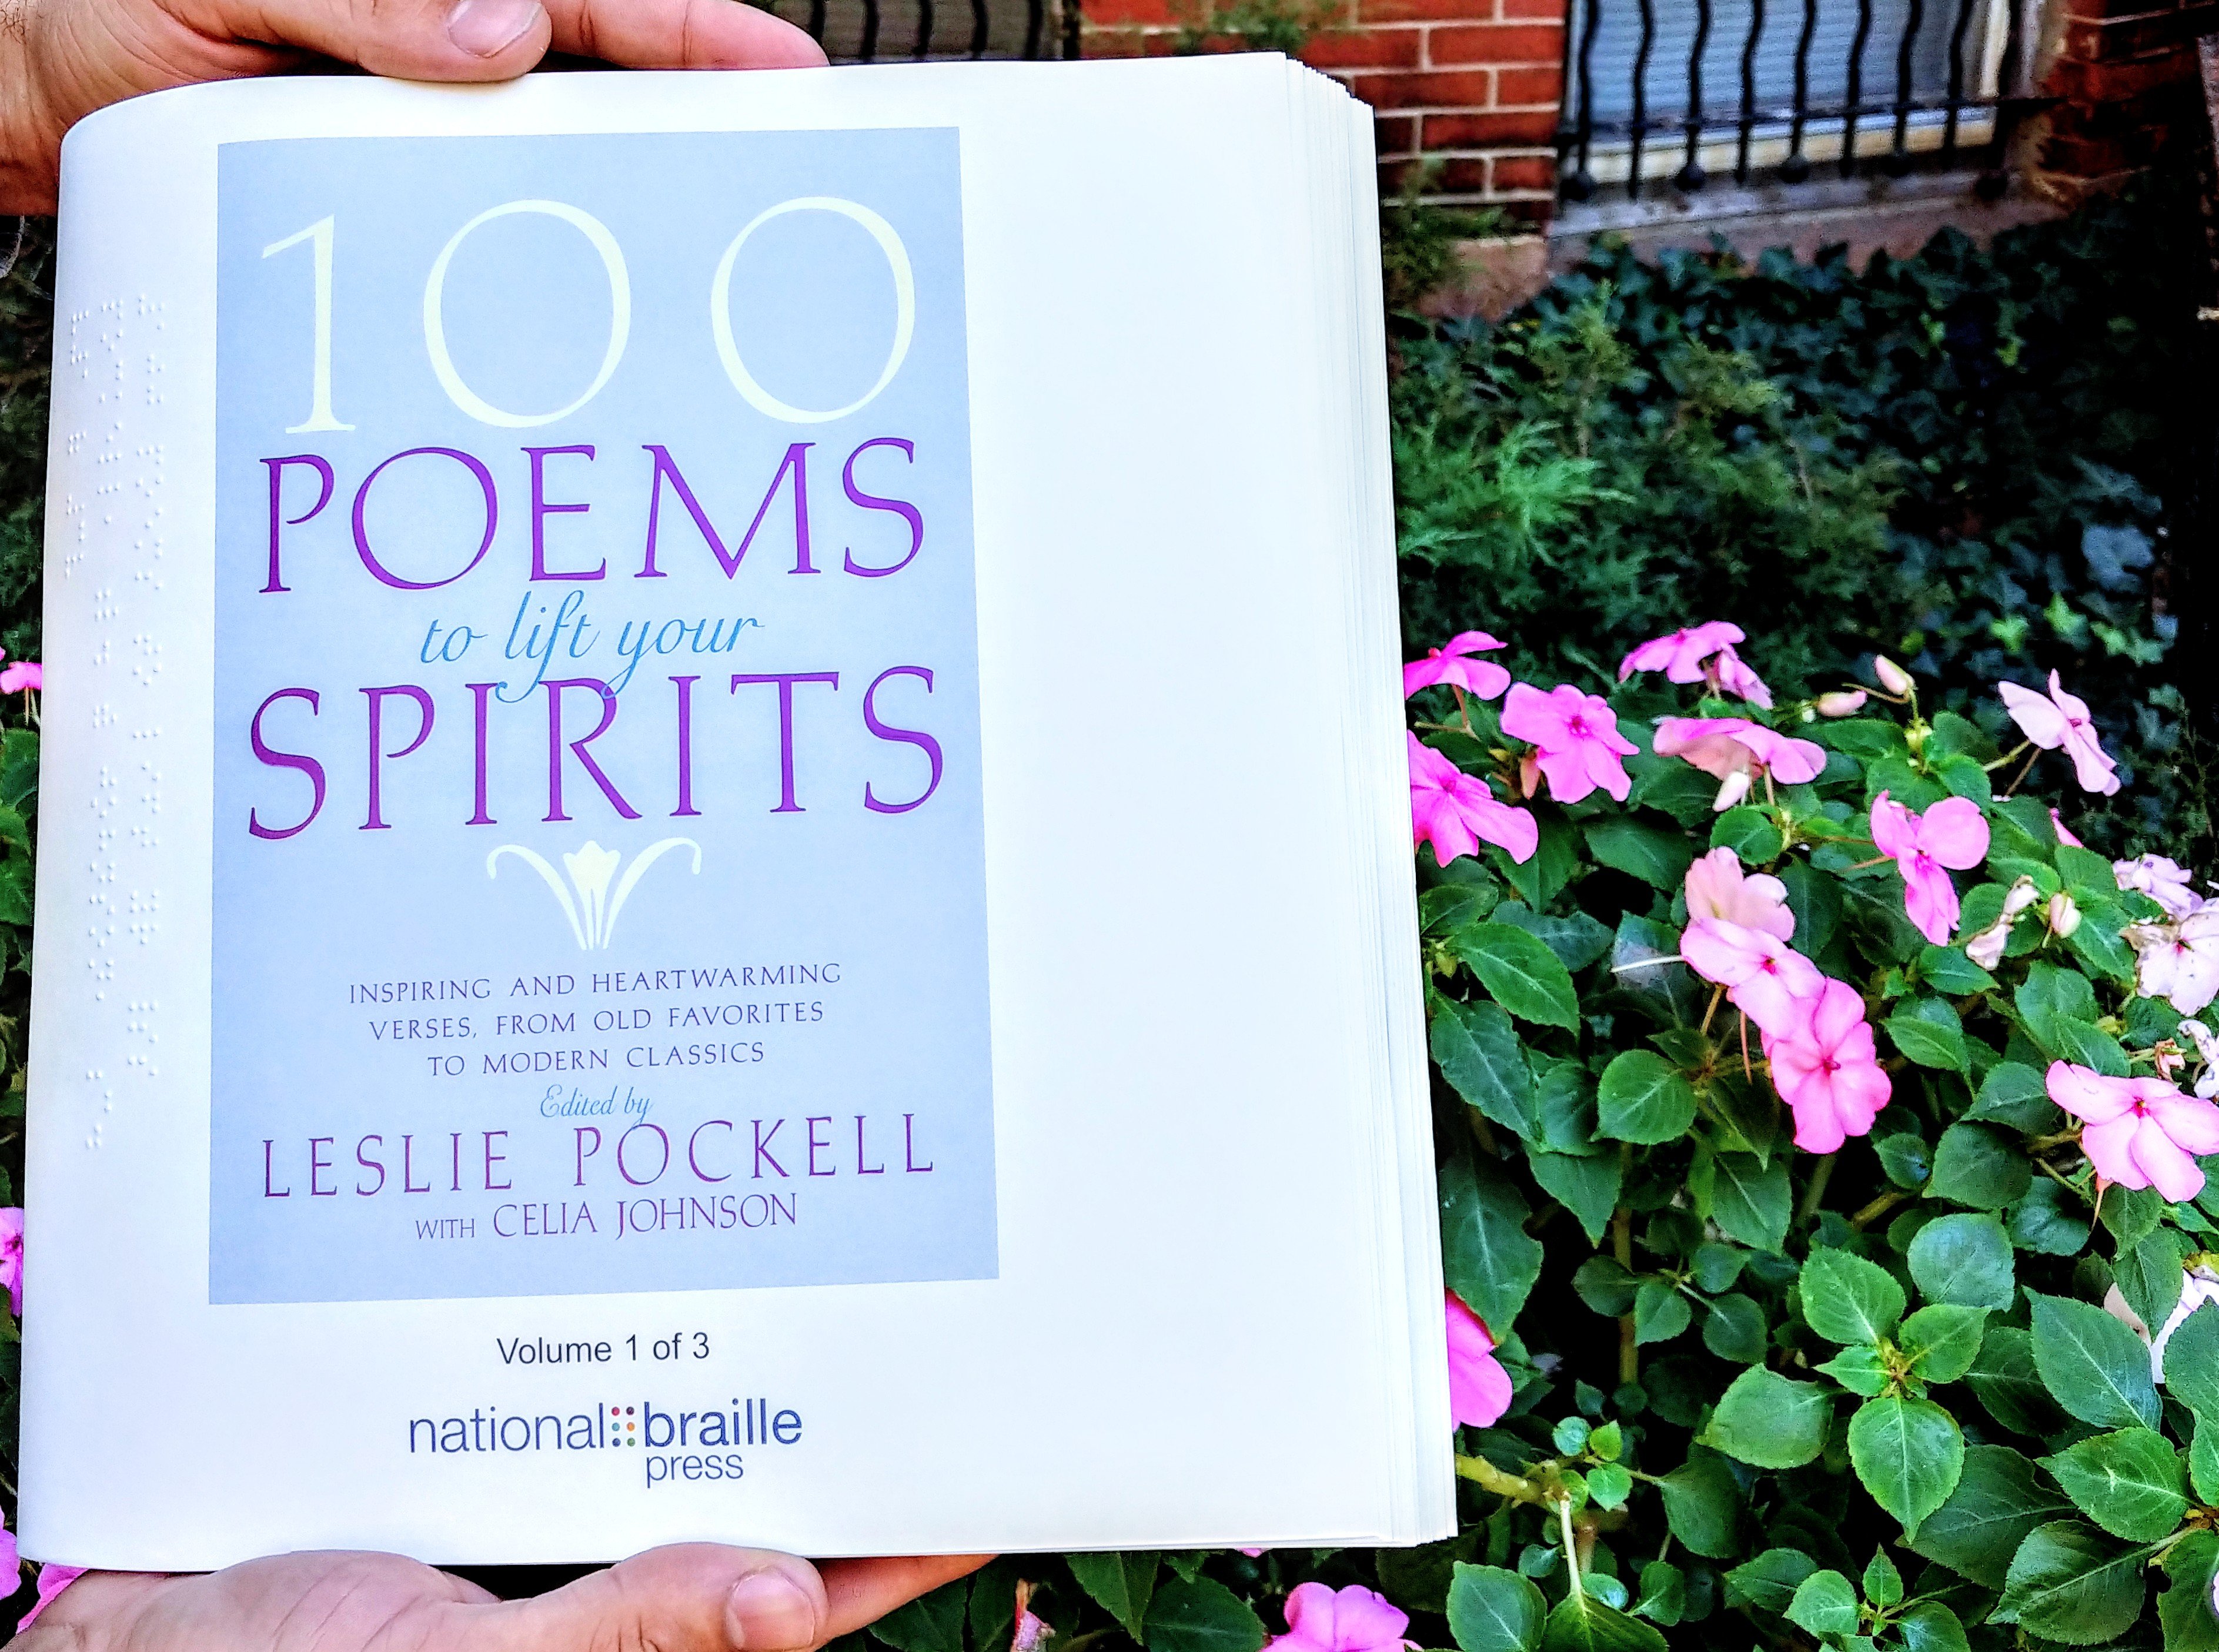 100 Poems to lift your spirit book cover held by someone stading next to some pink flowers.